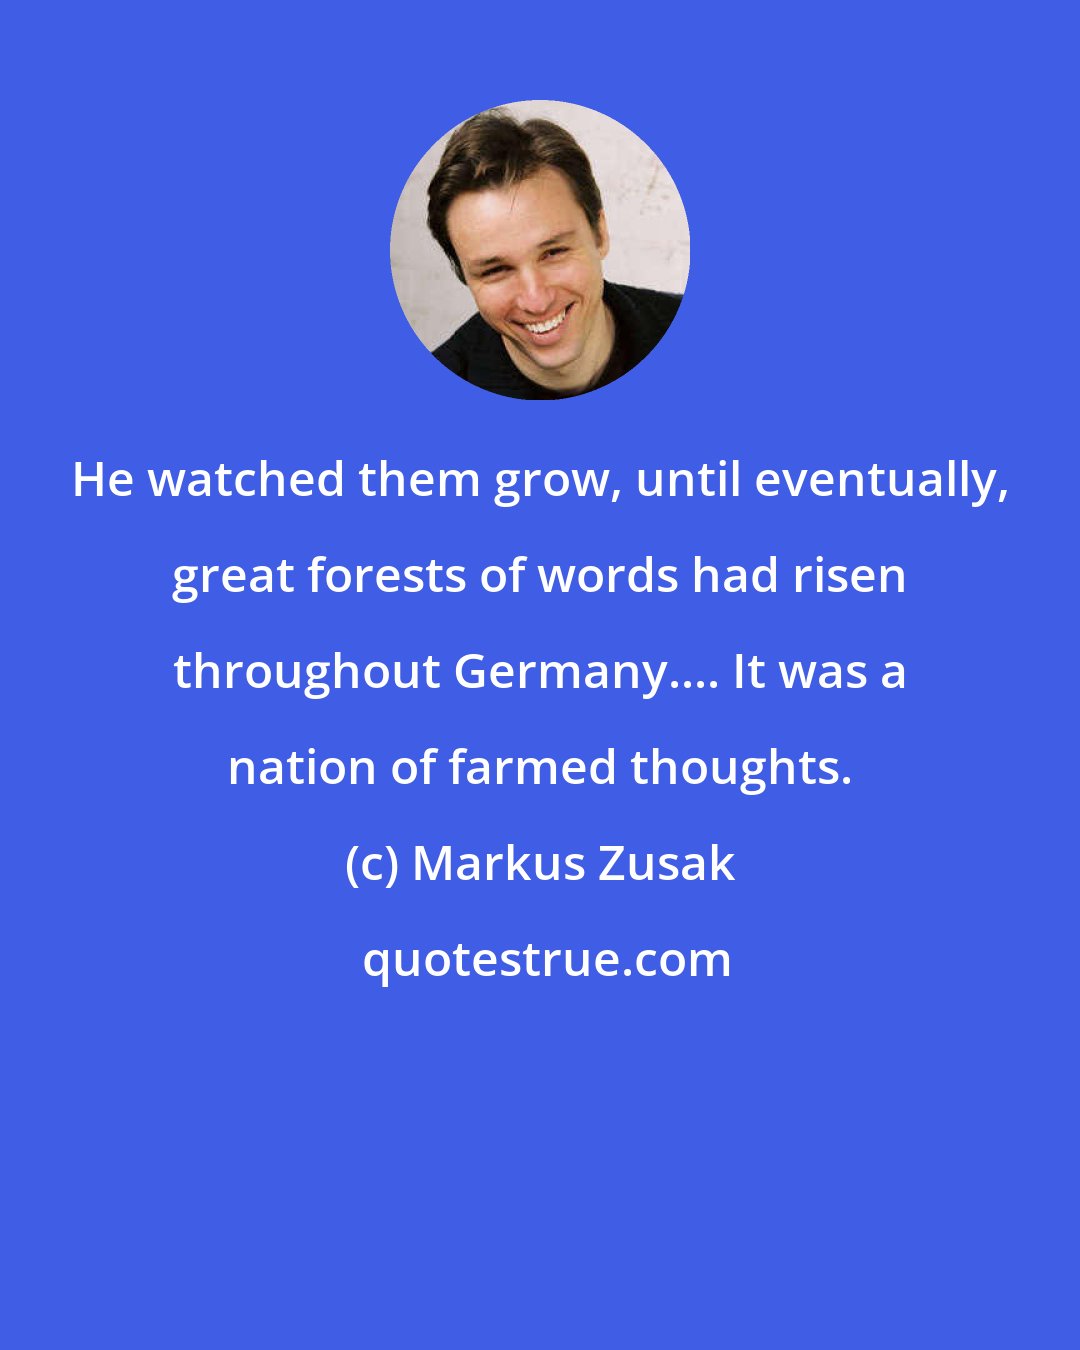 Markus Zusak: He watched them grow, until eventually, great forests of words had risen throughout Germany.... It was a nation of farmed thoughts.